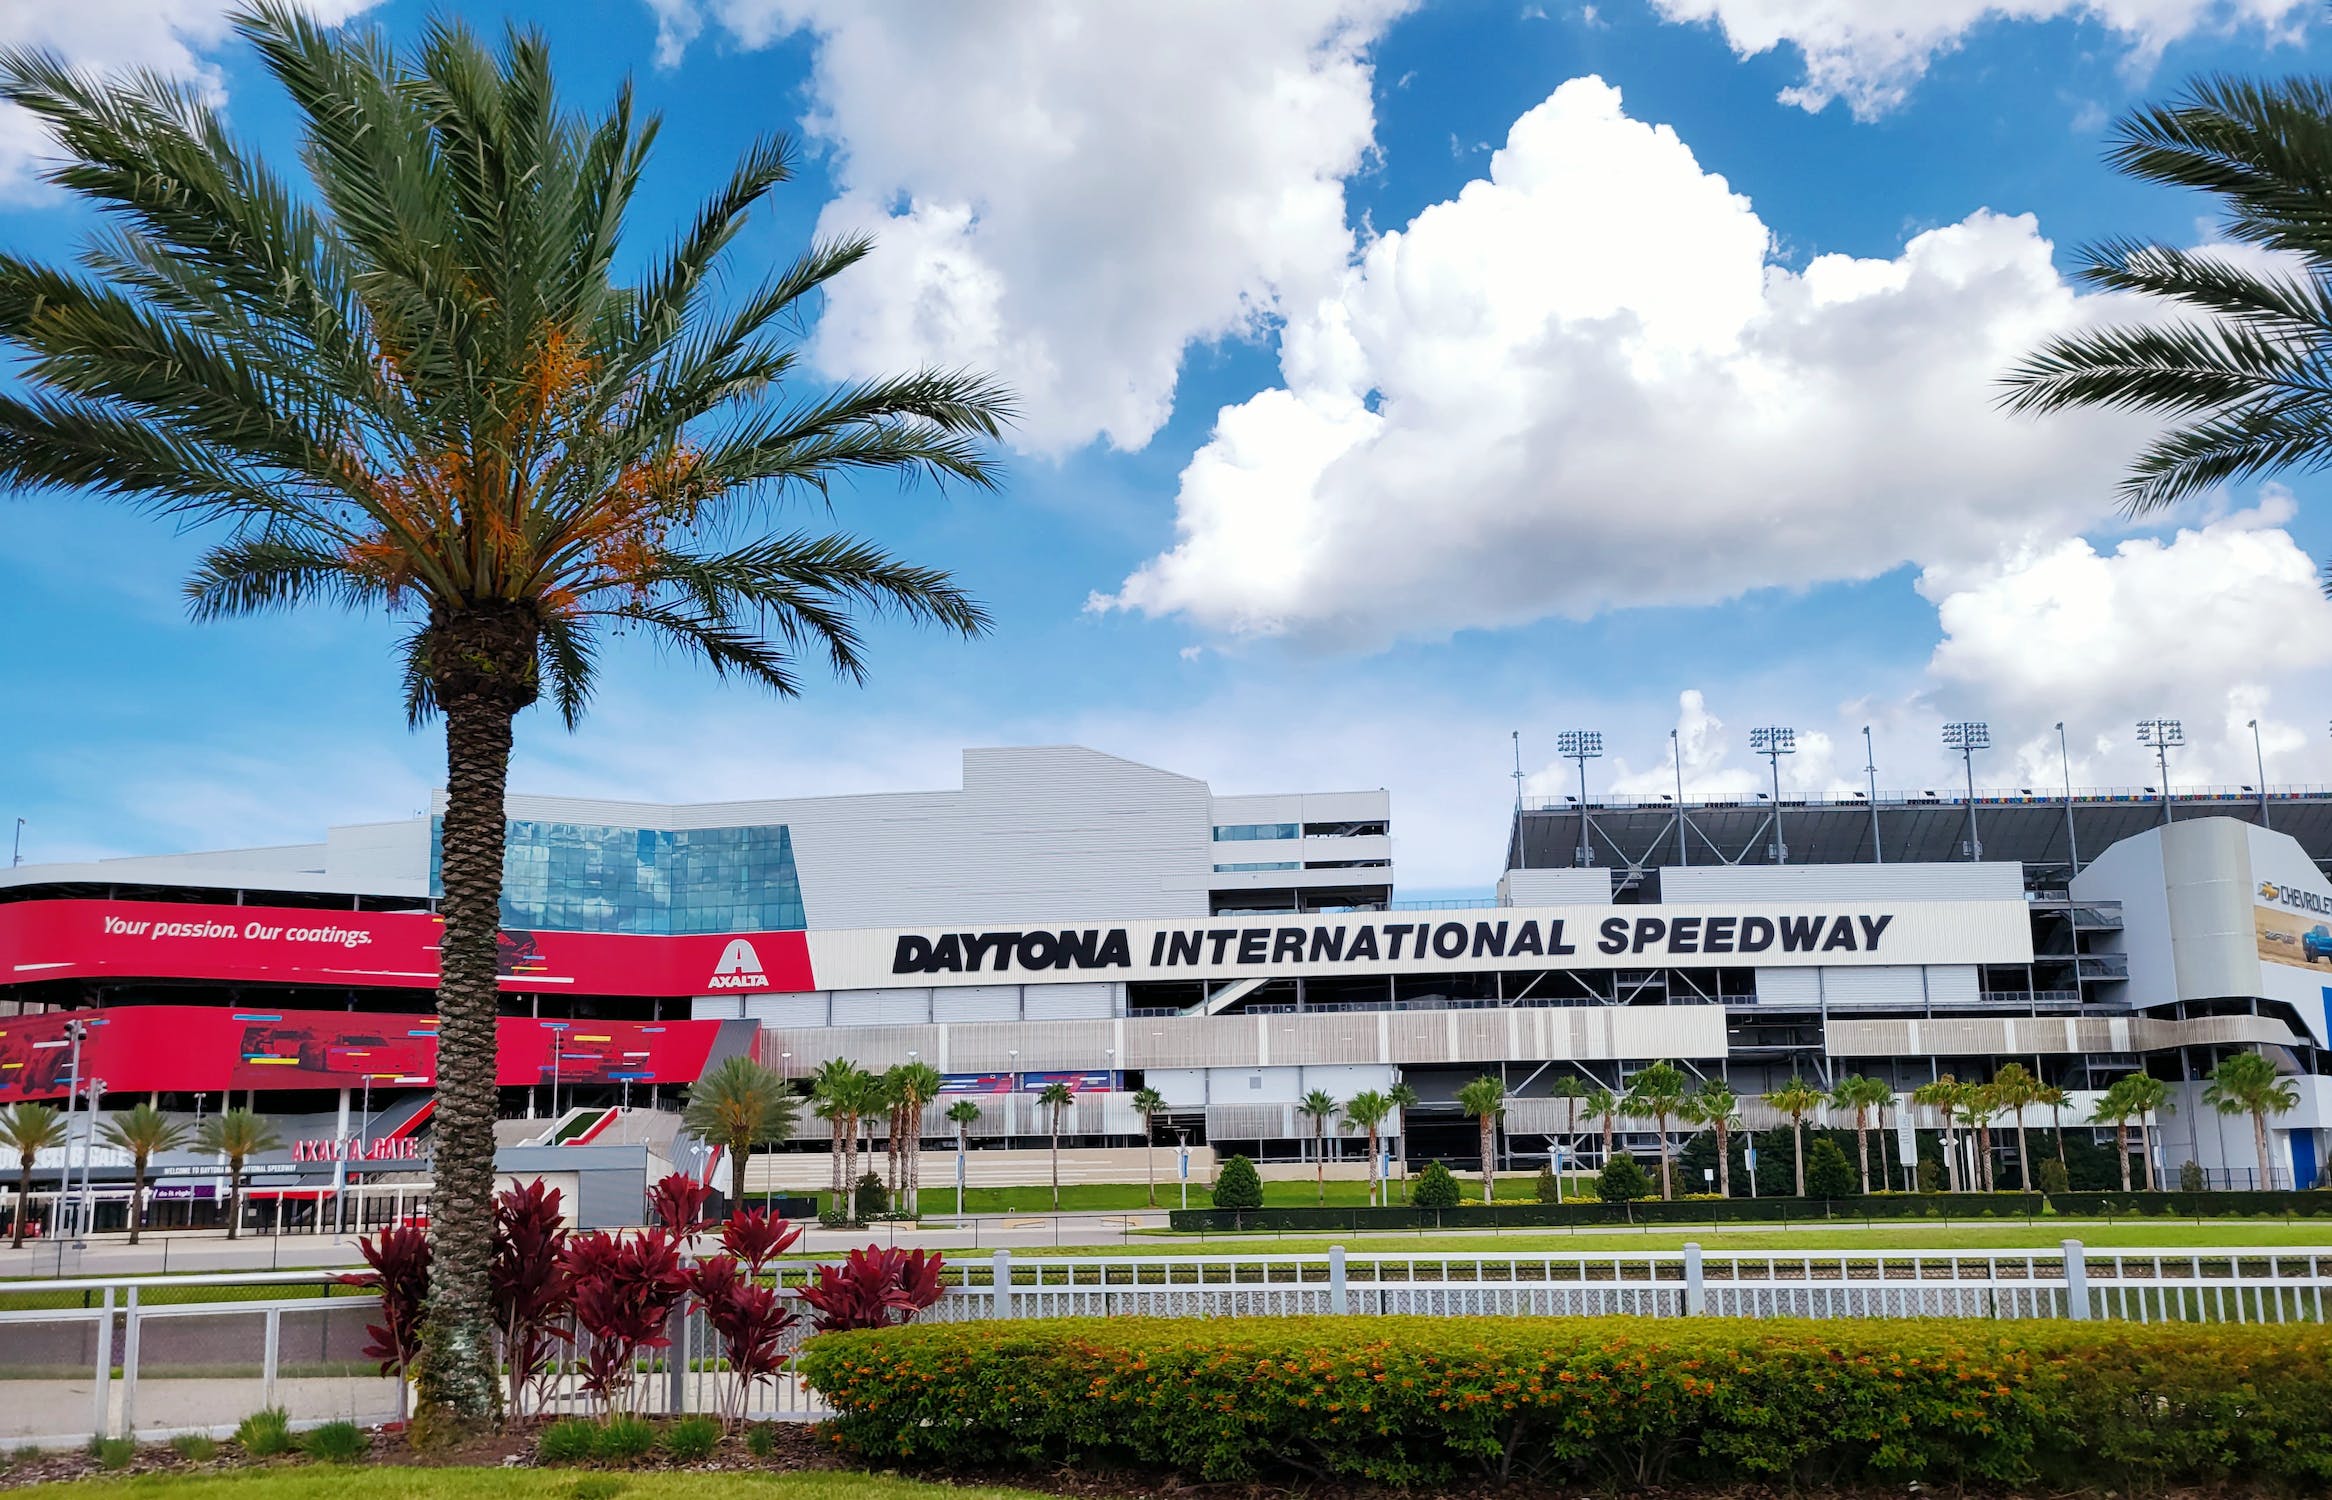 Daytona International Speedway on a sunny day, symbolizing thrilling racing action amidst warm weather and a palm tree, a quintessential Florida experience.